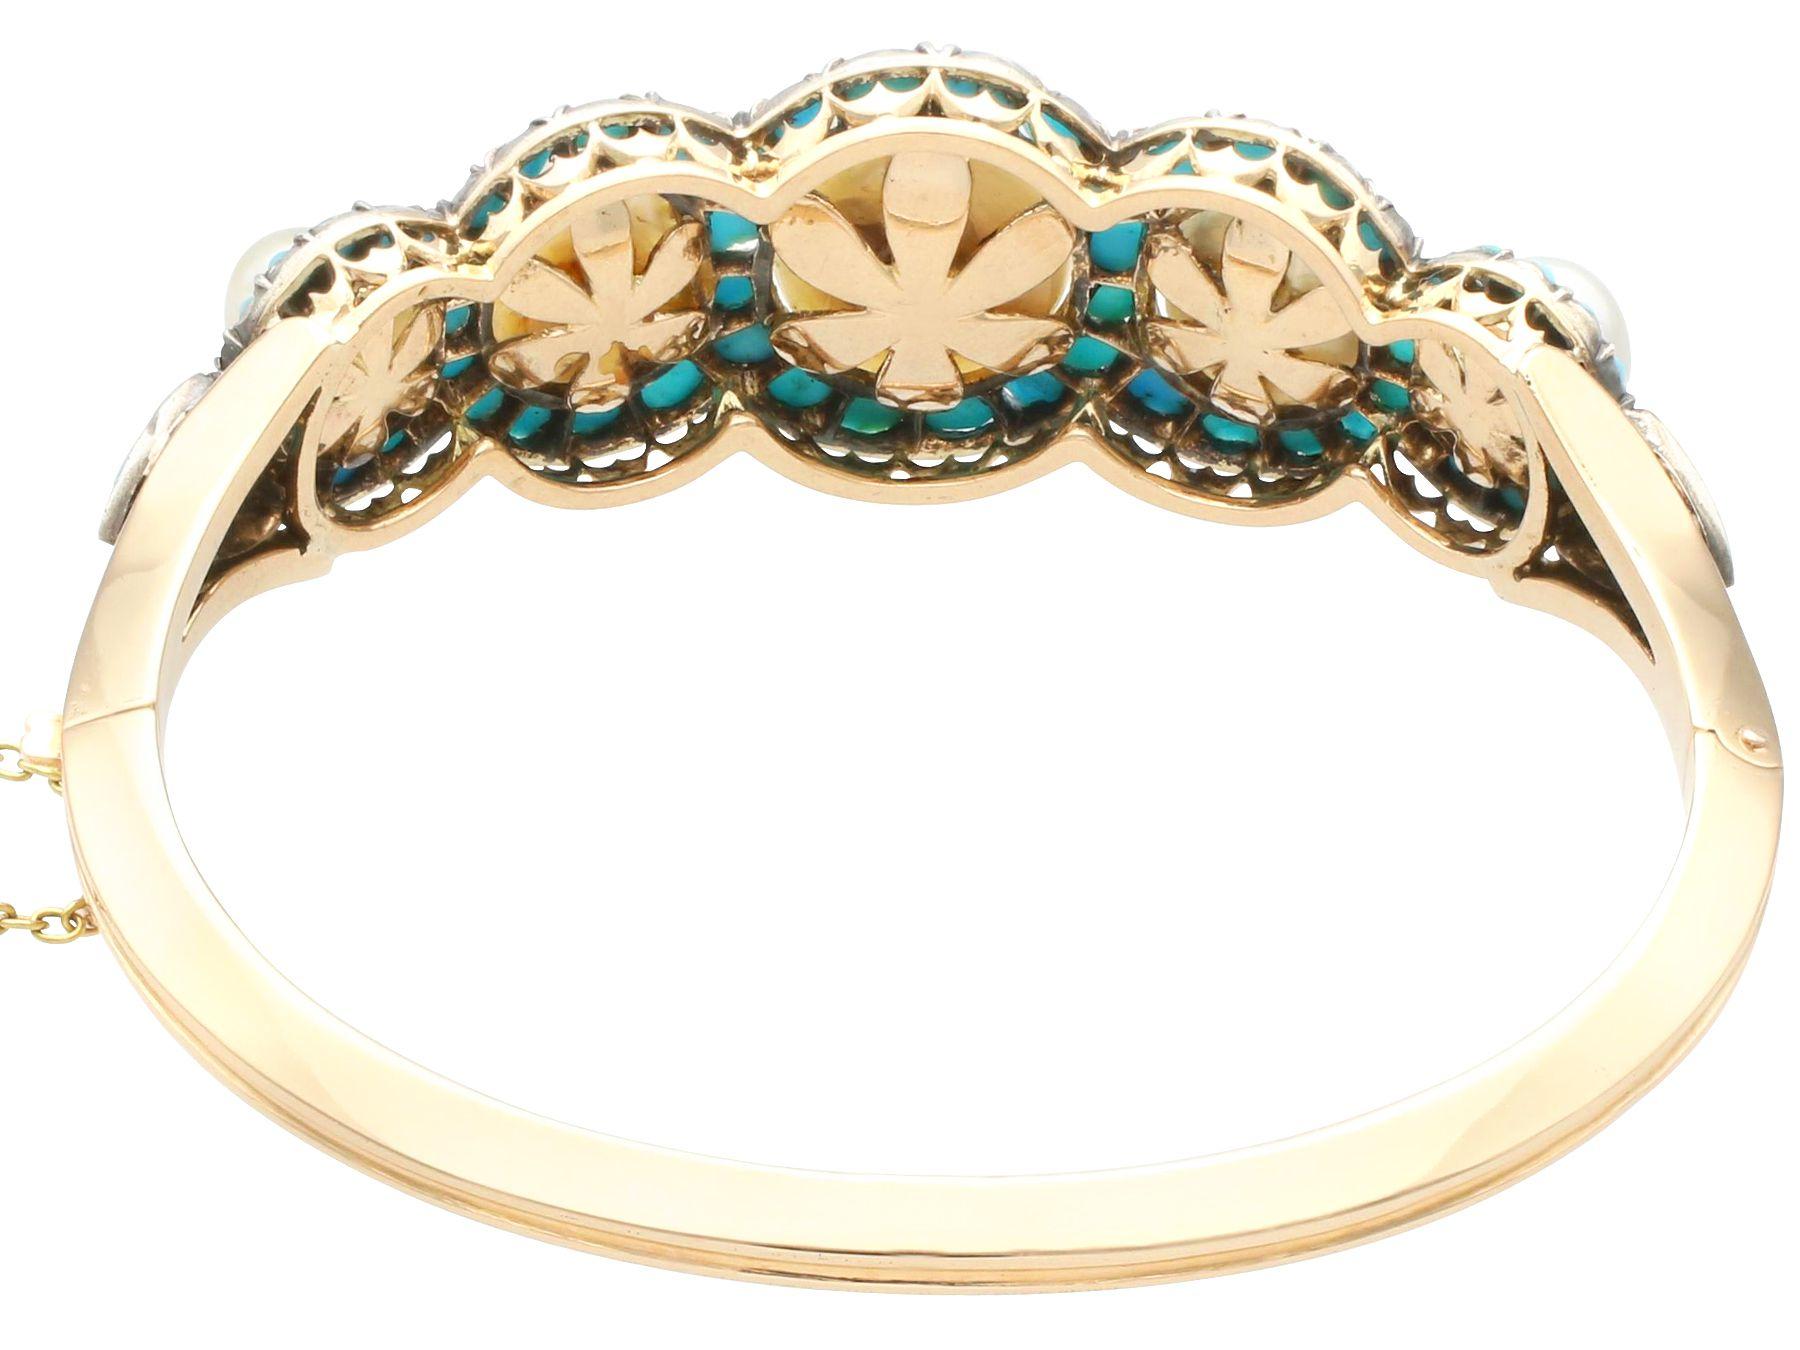 1880s Antique Victorian Natural Pearl and Turquoise Gold Bangle For Sale 1